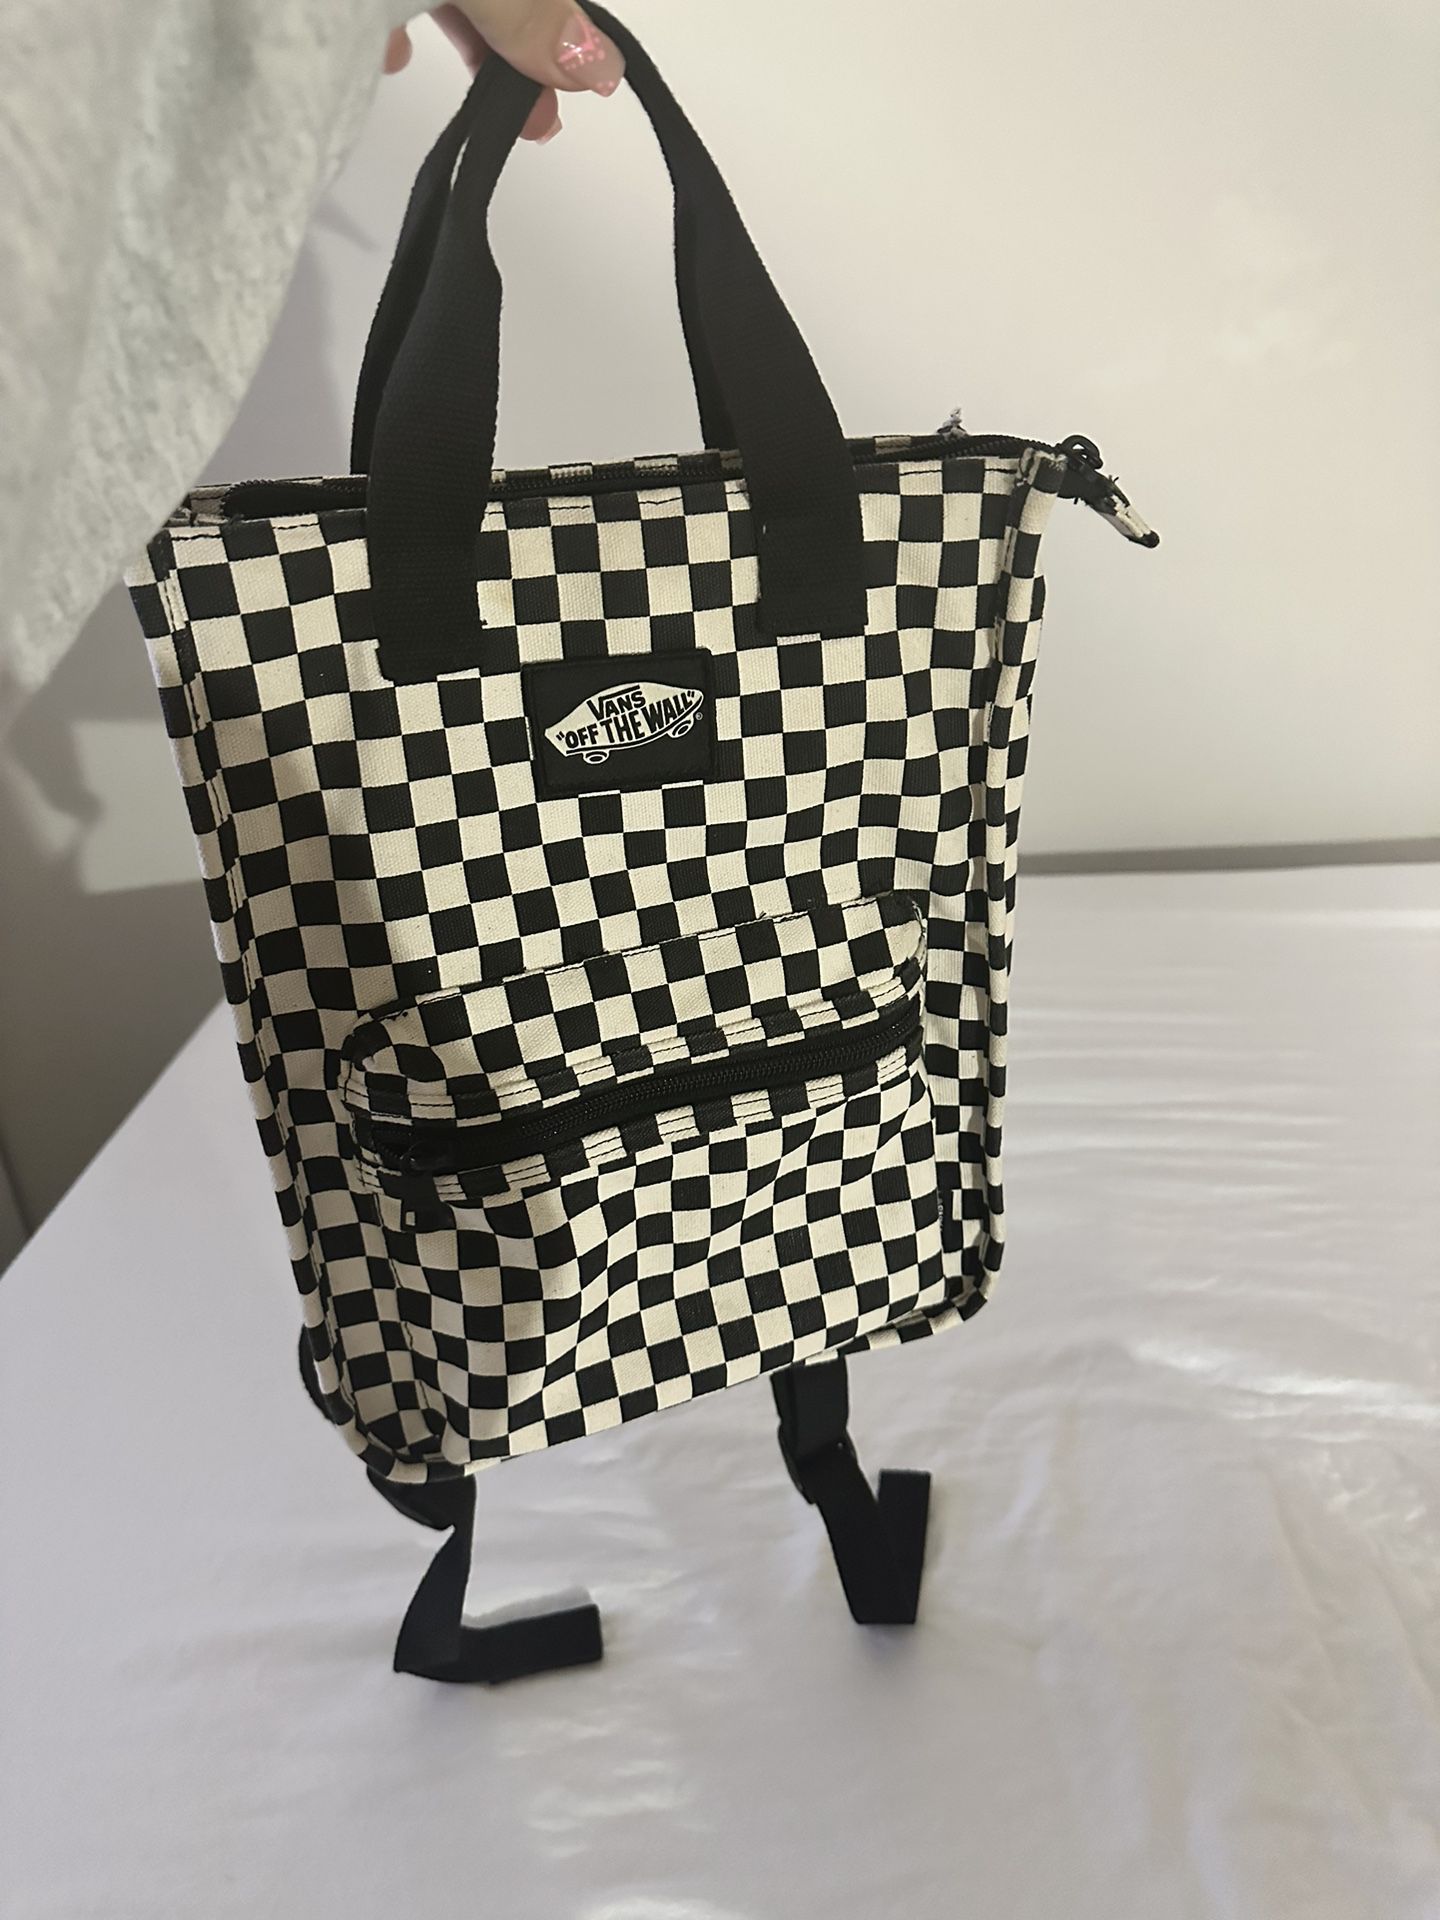 Checkered Vans in Black and White Tote Bag